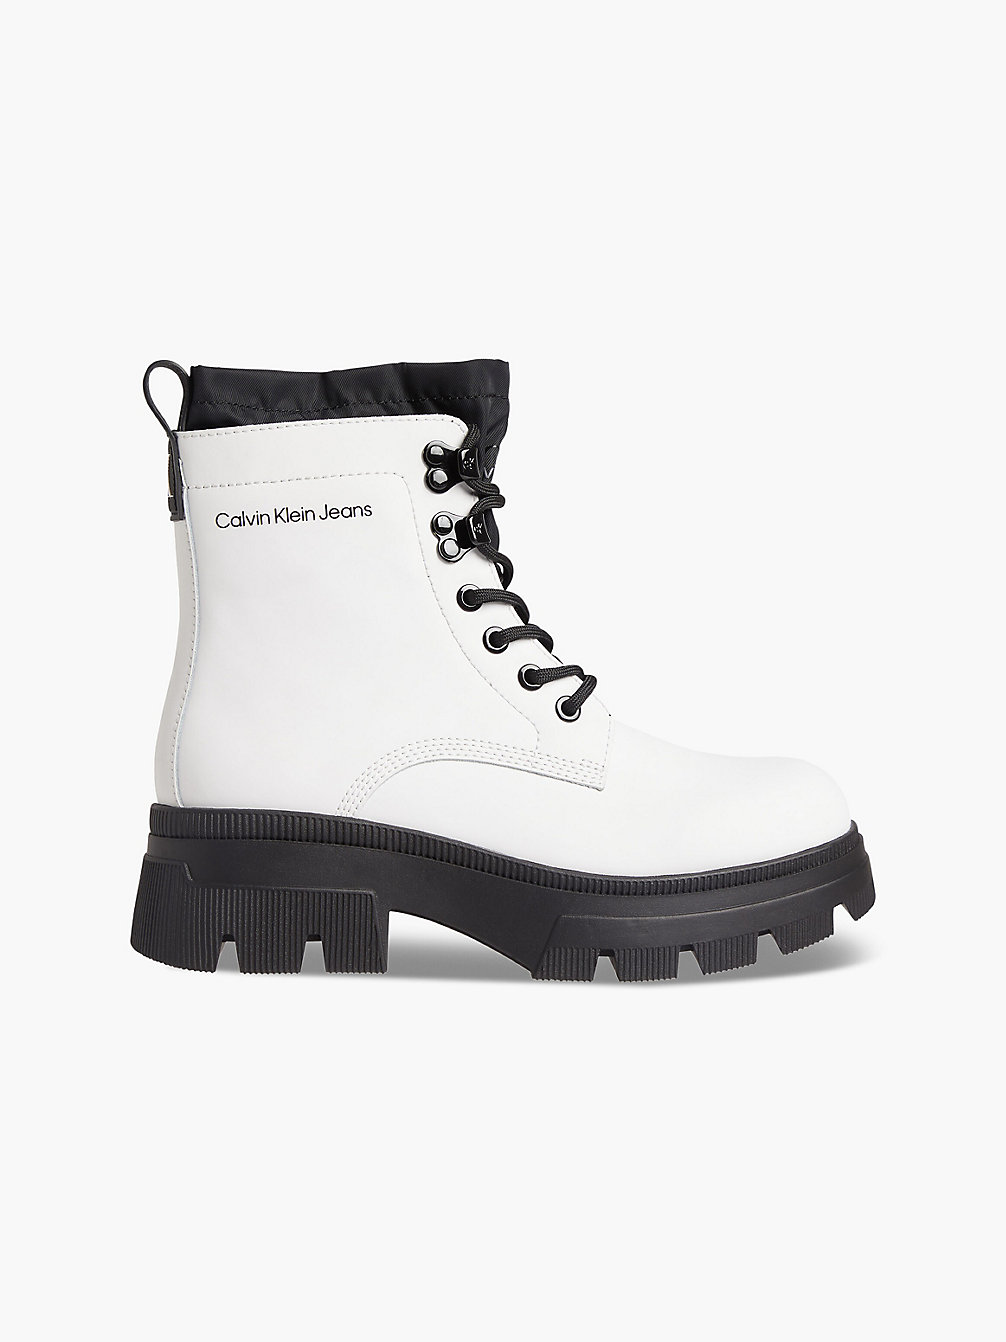 BRIGHT WHITE Leather Chunky Platform Boots undefined women Calvin Klein